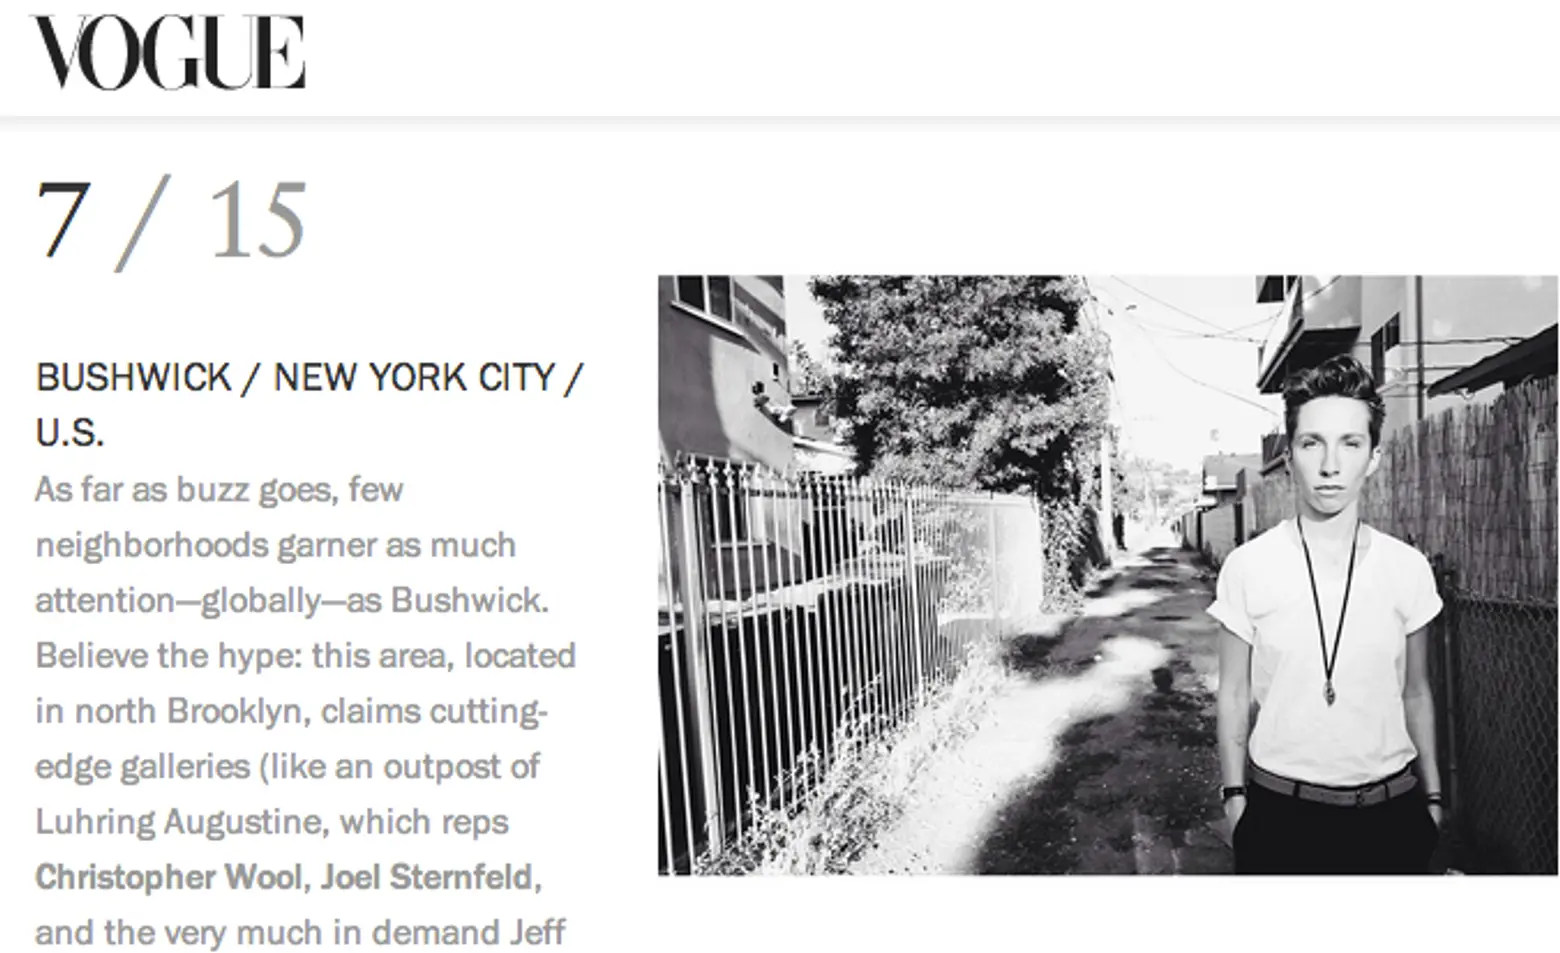 Bushwick is the 7th Coolest Neighborhood in the World According to Vogue